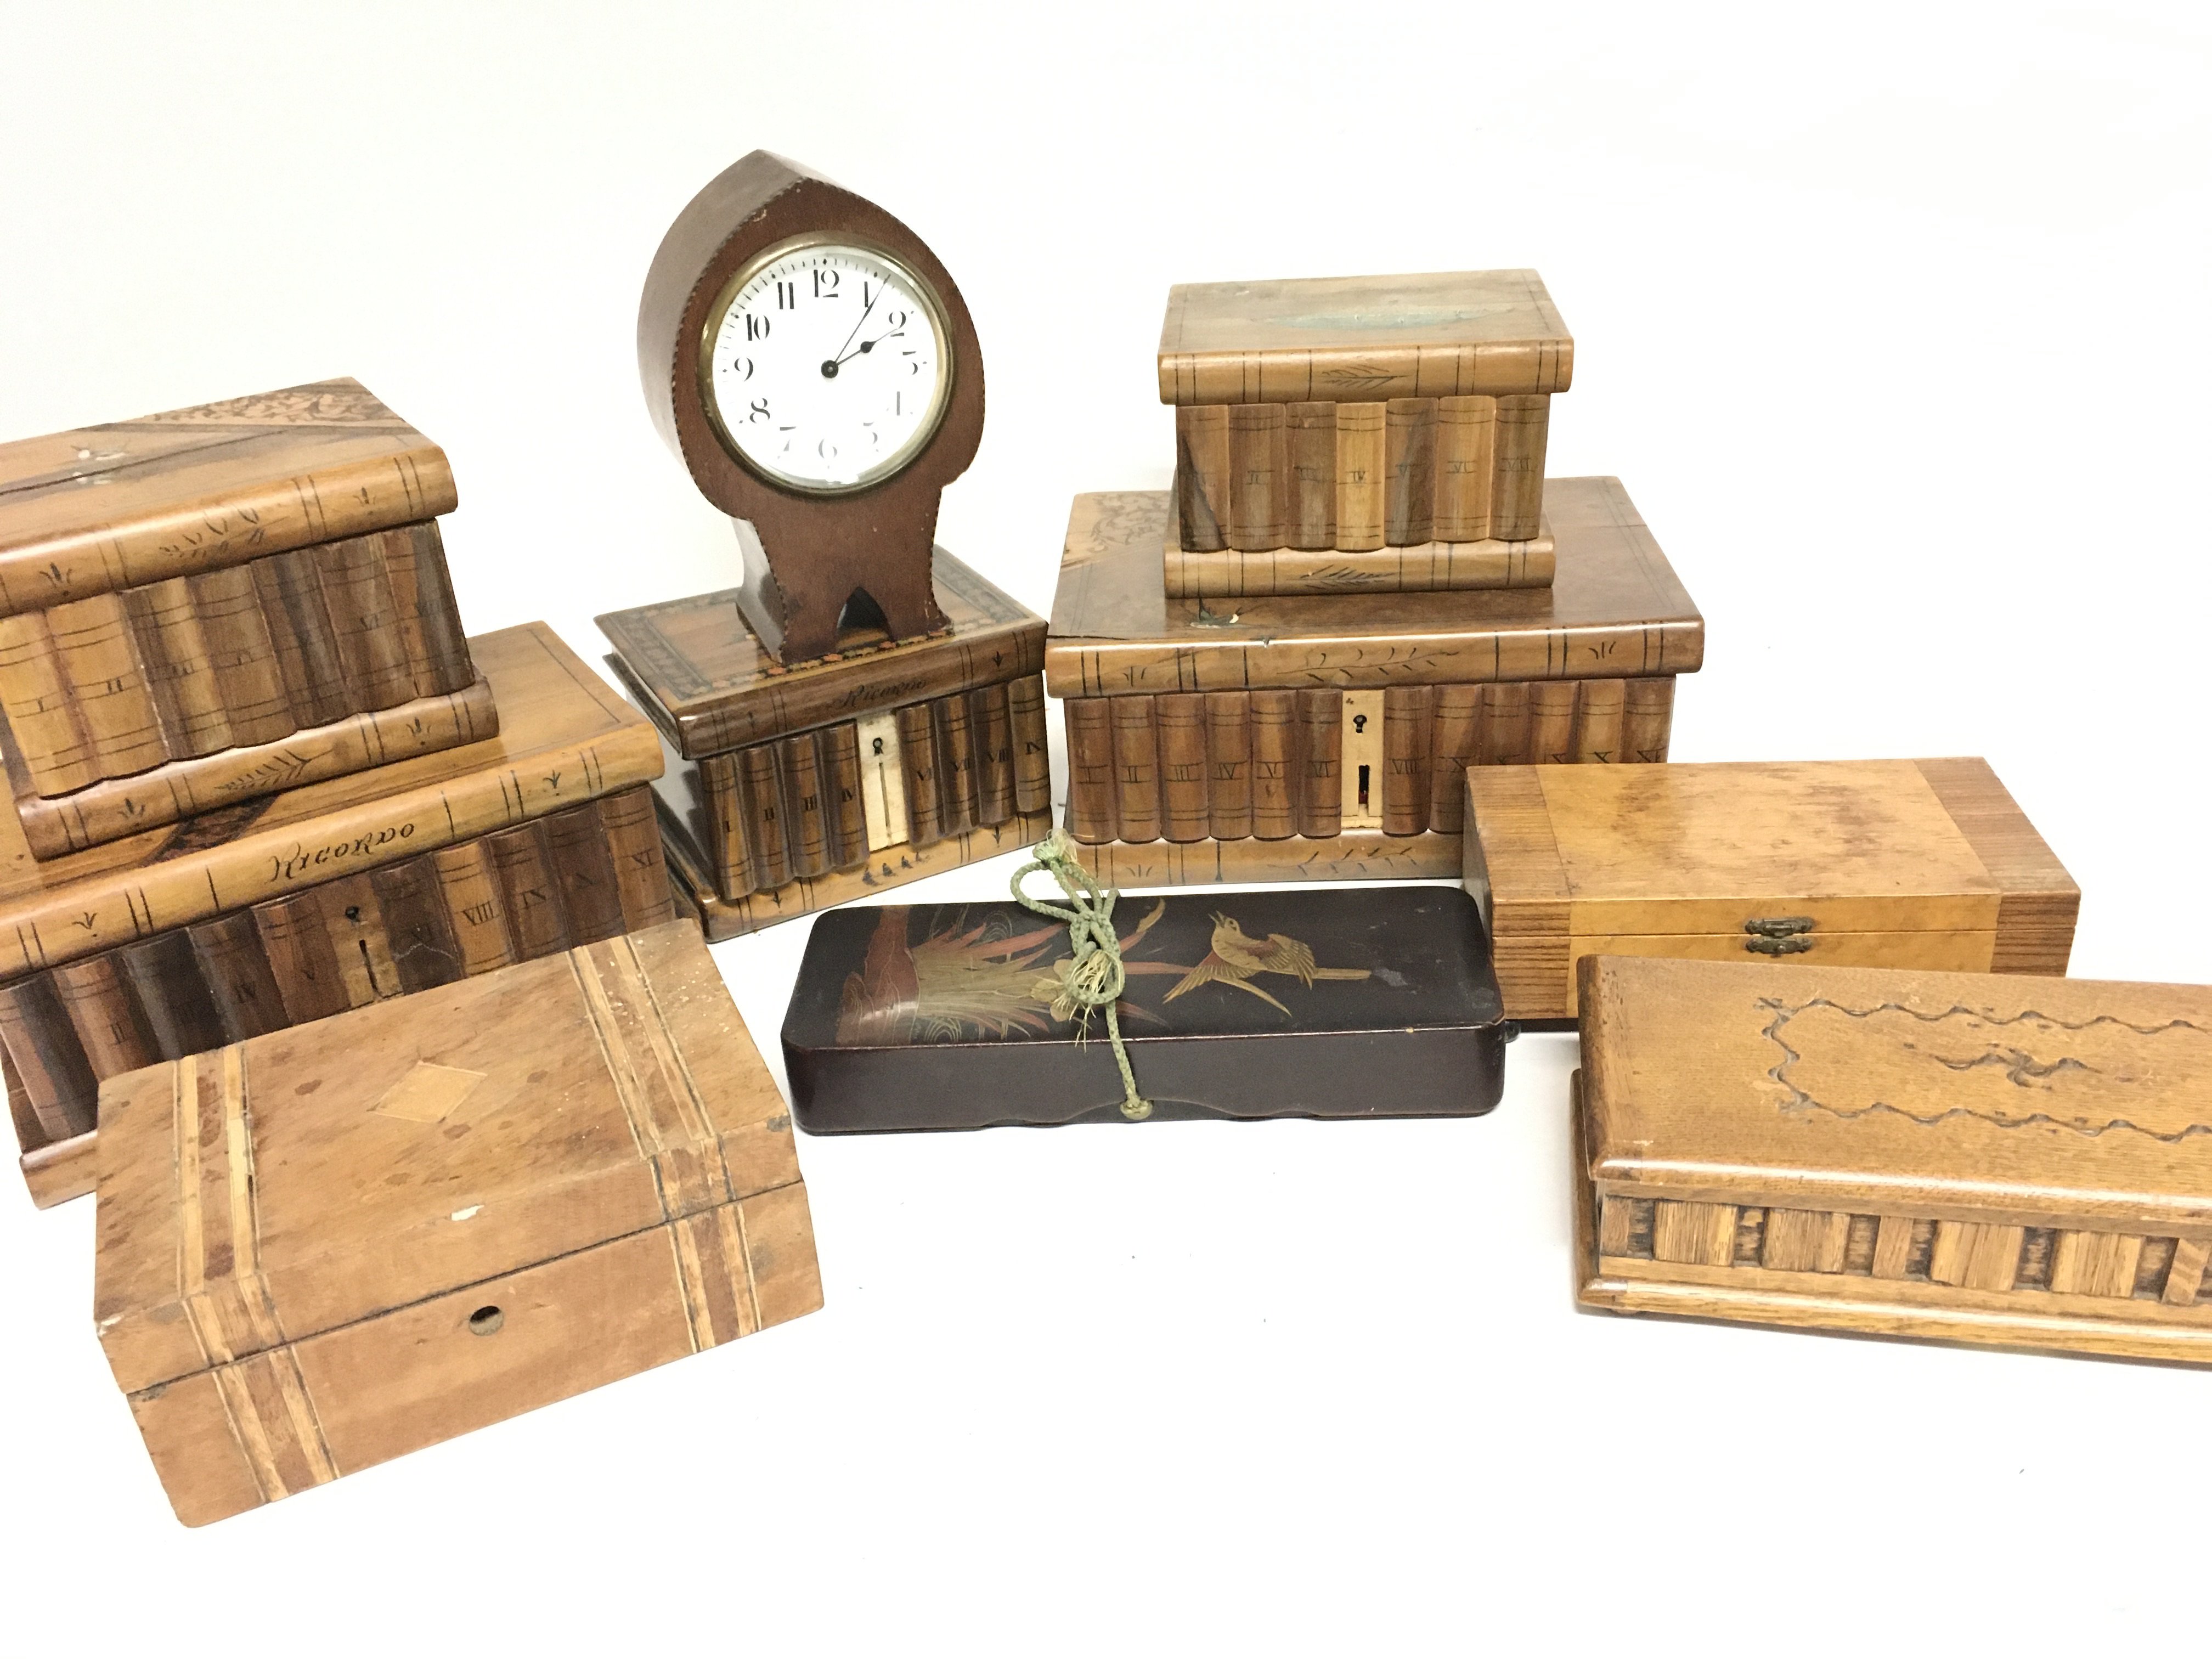 A Collection of Wooden Trinket Boxes and a Clock.